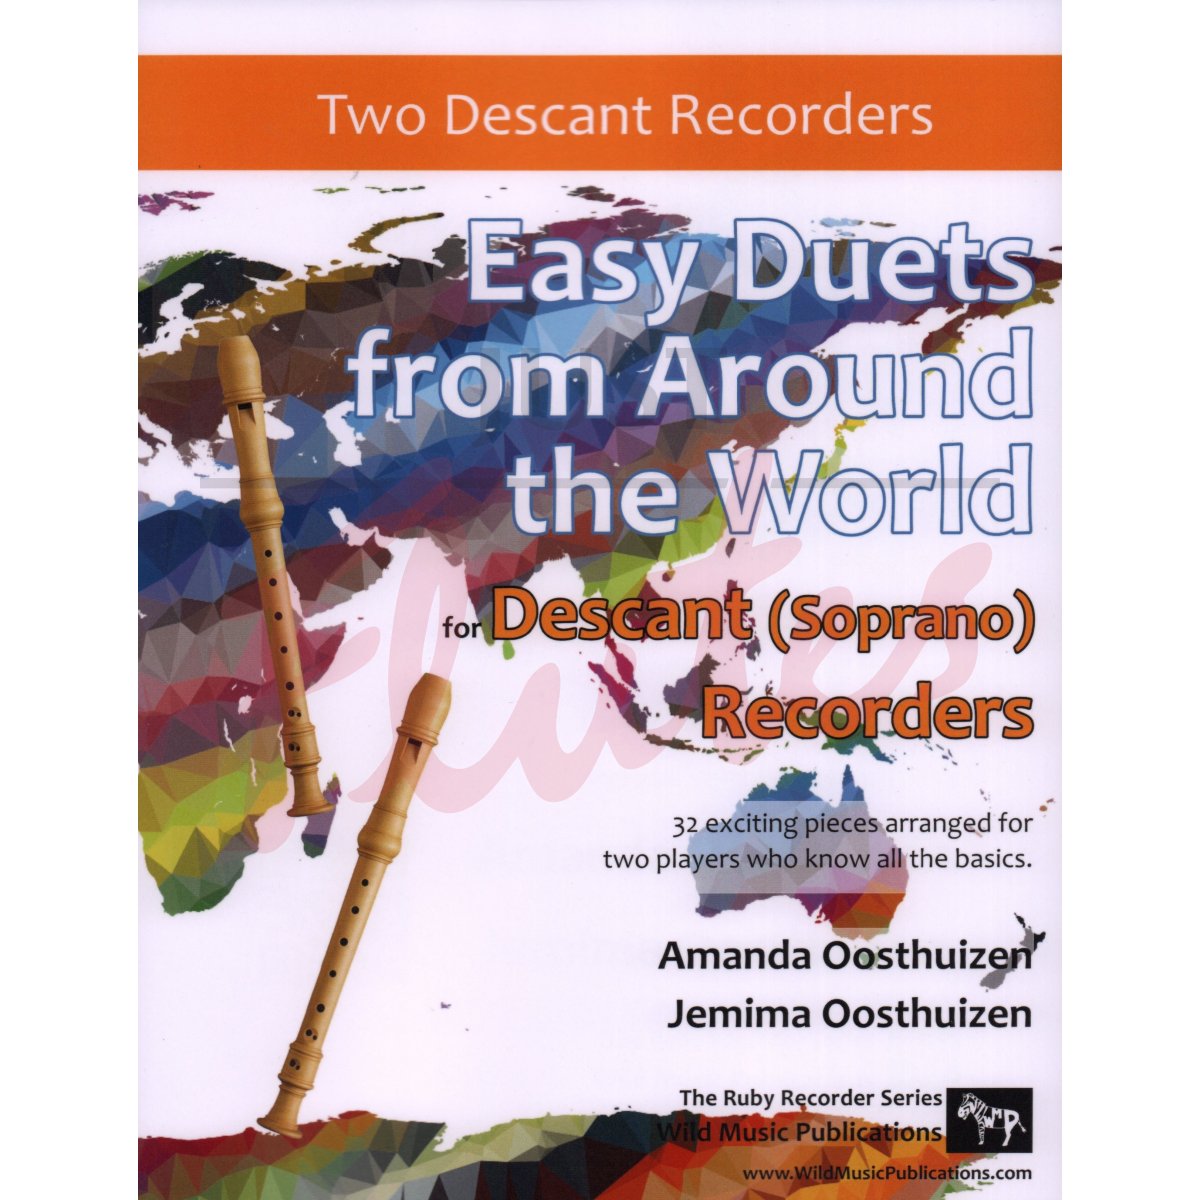 Easy Duets from Around the World for Two Descant Recorders